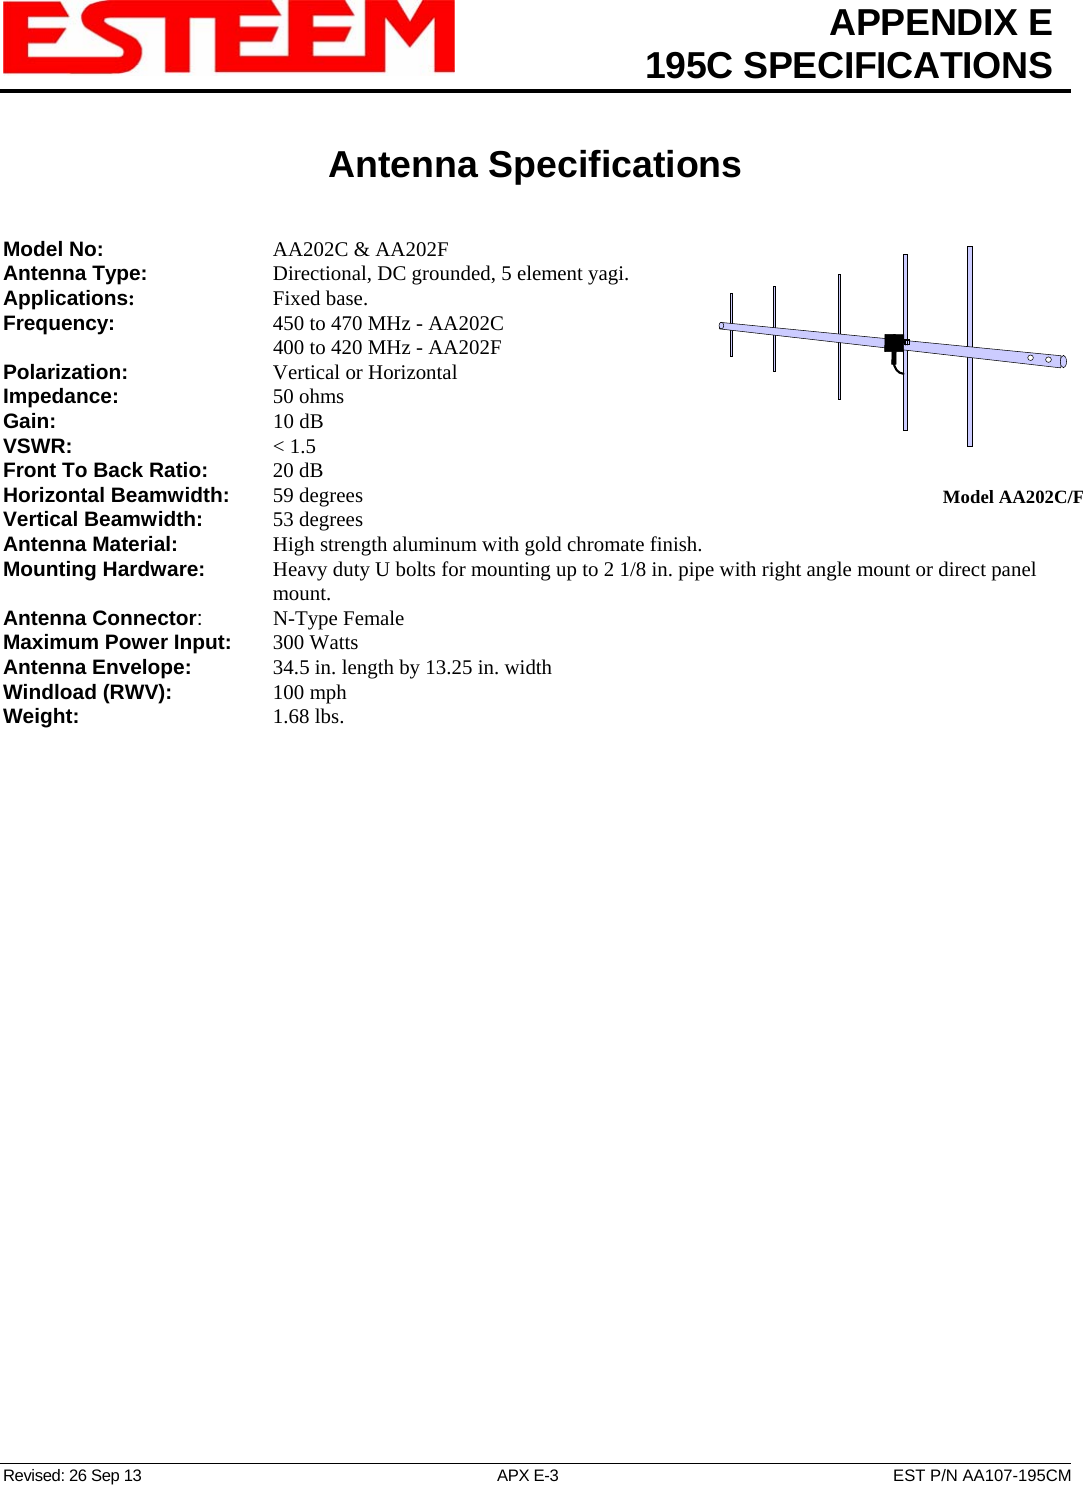  APPENDIX E  195C SPECIFICATIONS   Antenna Specifications   Revised: 26 Sep 13  APX E-3  EST P/N AA107-195CM  Model AA202C/FModel No:    AA202C &amp; AA202F Antenna Type:      Directional, DC grounded, 5 element yagi.  Applications:    Fixed base. Frequency:    450 to 470 MHz - AA202C       400 to 420 MHz - AA202F  Polarization:    Vertical or Horizontal Impedance:    50 ohms Gain:     10 dB VSWR:      &lt; 1.5  Front To Back Ratio:   20 dB Horizontal Beamwidth:  59 degrees Vertical Beamwidth:      53 degrees Antenna Material:     High strength aluminum with gold chromate finish.  Mounting Hardware:      Heavy duty U bolts for mounting up to 2 1/8 in. pipe with right angle mount or direct panel mount. Antenna Connector:   N-Type Female Maximum Power Input: 300 Watts Antenna Envelope:    34.5 in. length by 13.25 in. width Windload (RWV):   100 mph Weight:     1.68 lbs.        